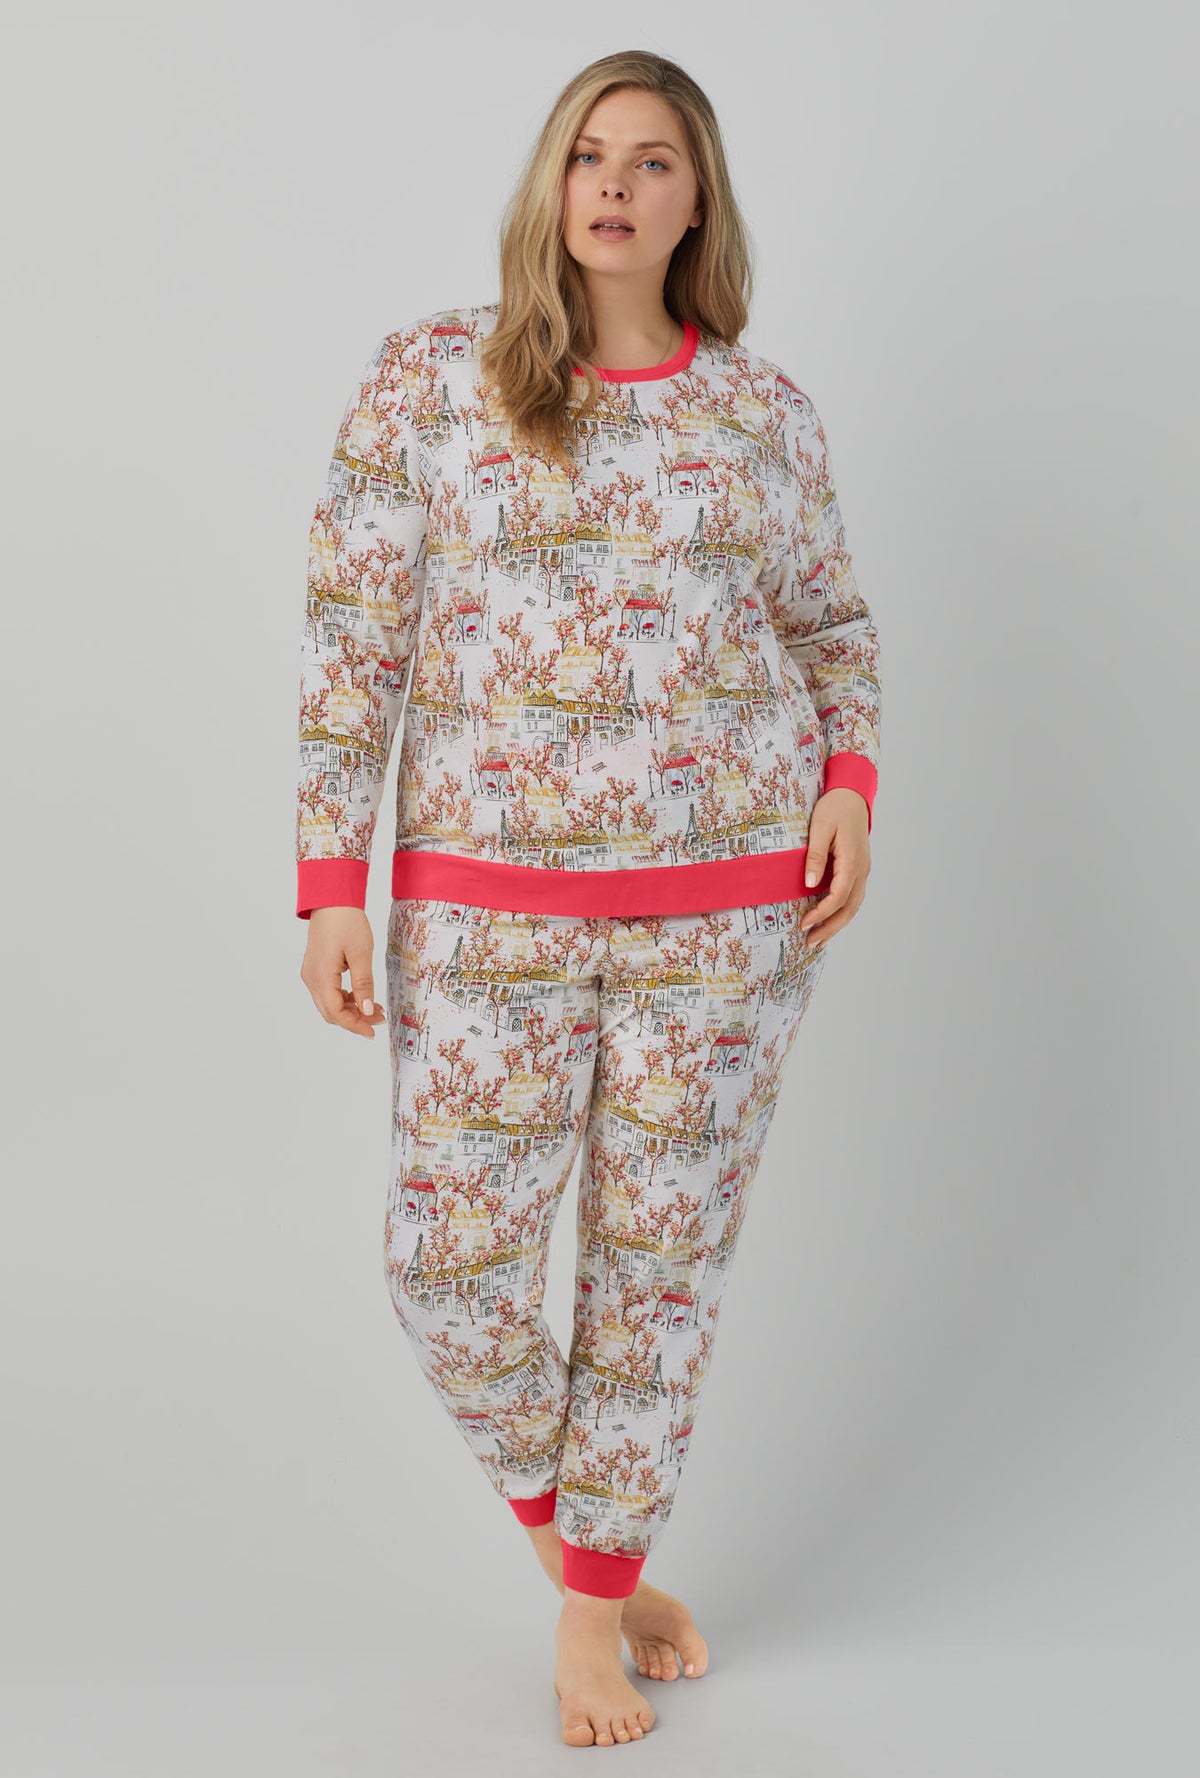 A lady wearing Long Sleeve Pullover Crew and Jogger Stretch Jersey PJ Set with fall in paris print.